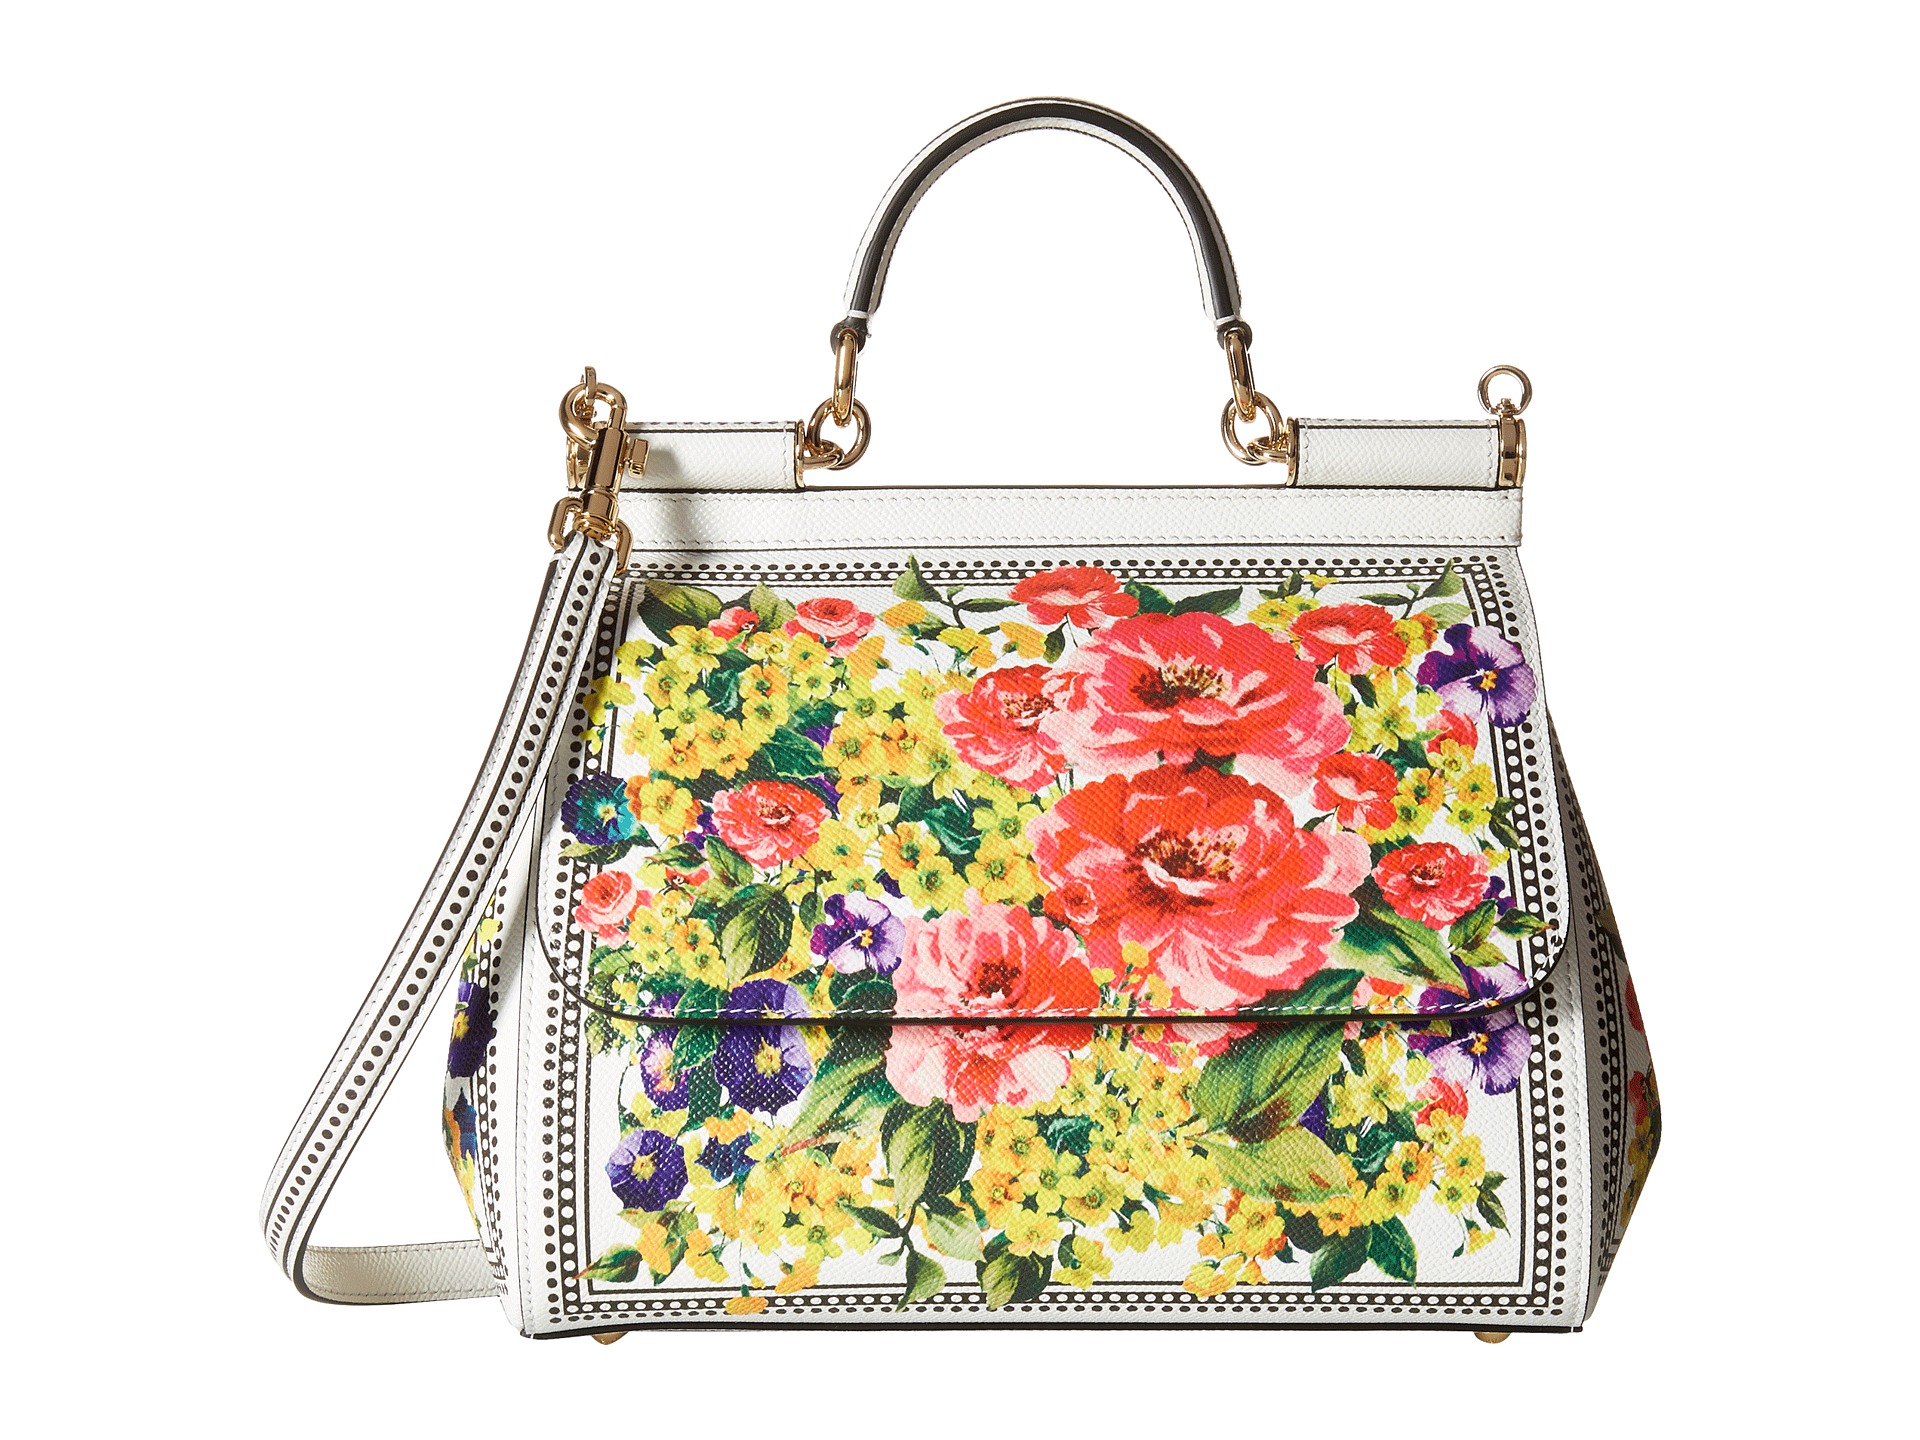 Dolce & Gabbana Floral Printed Sicily Bag at Luxury.Zappos.com